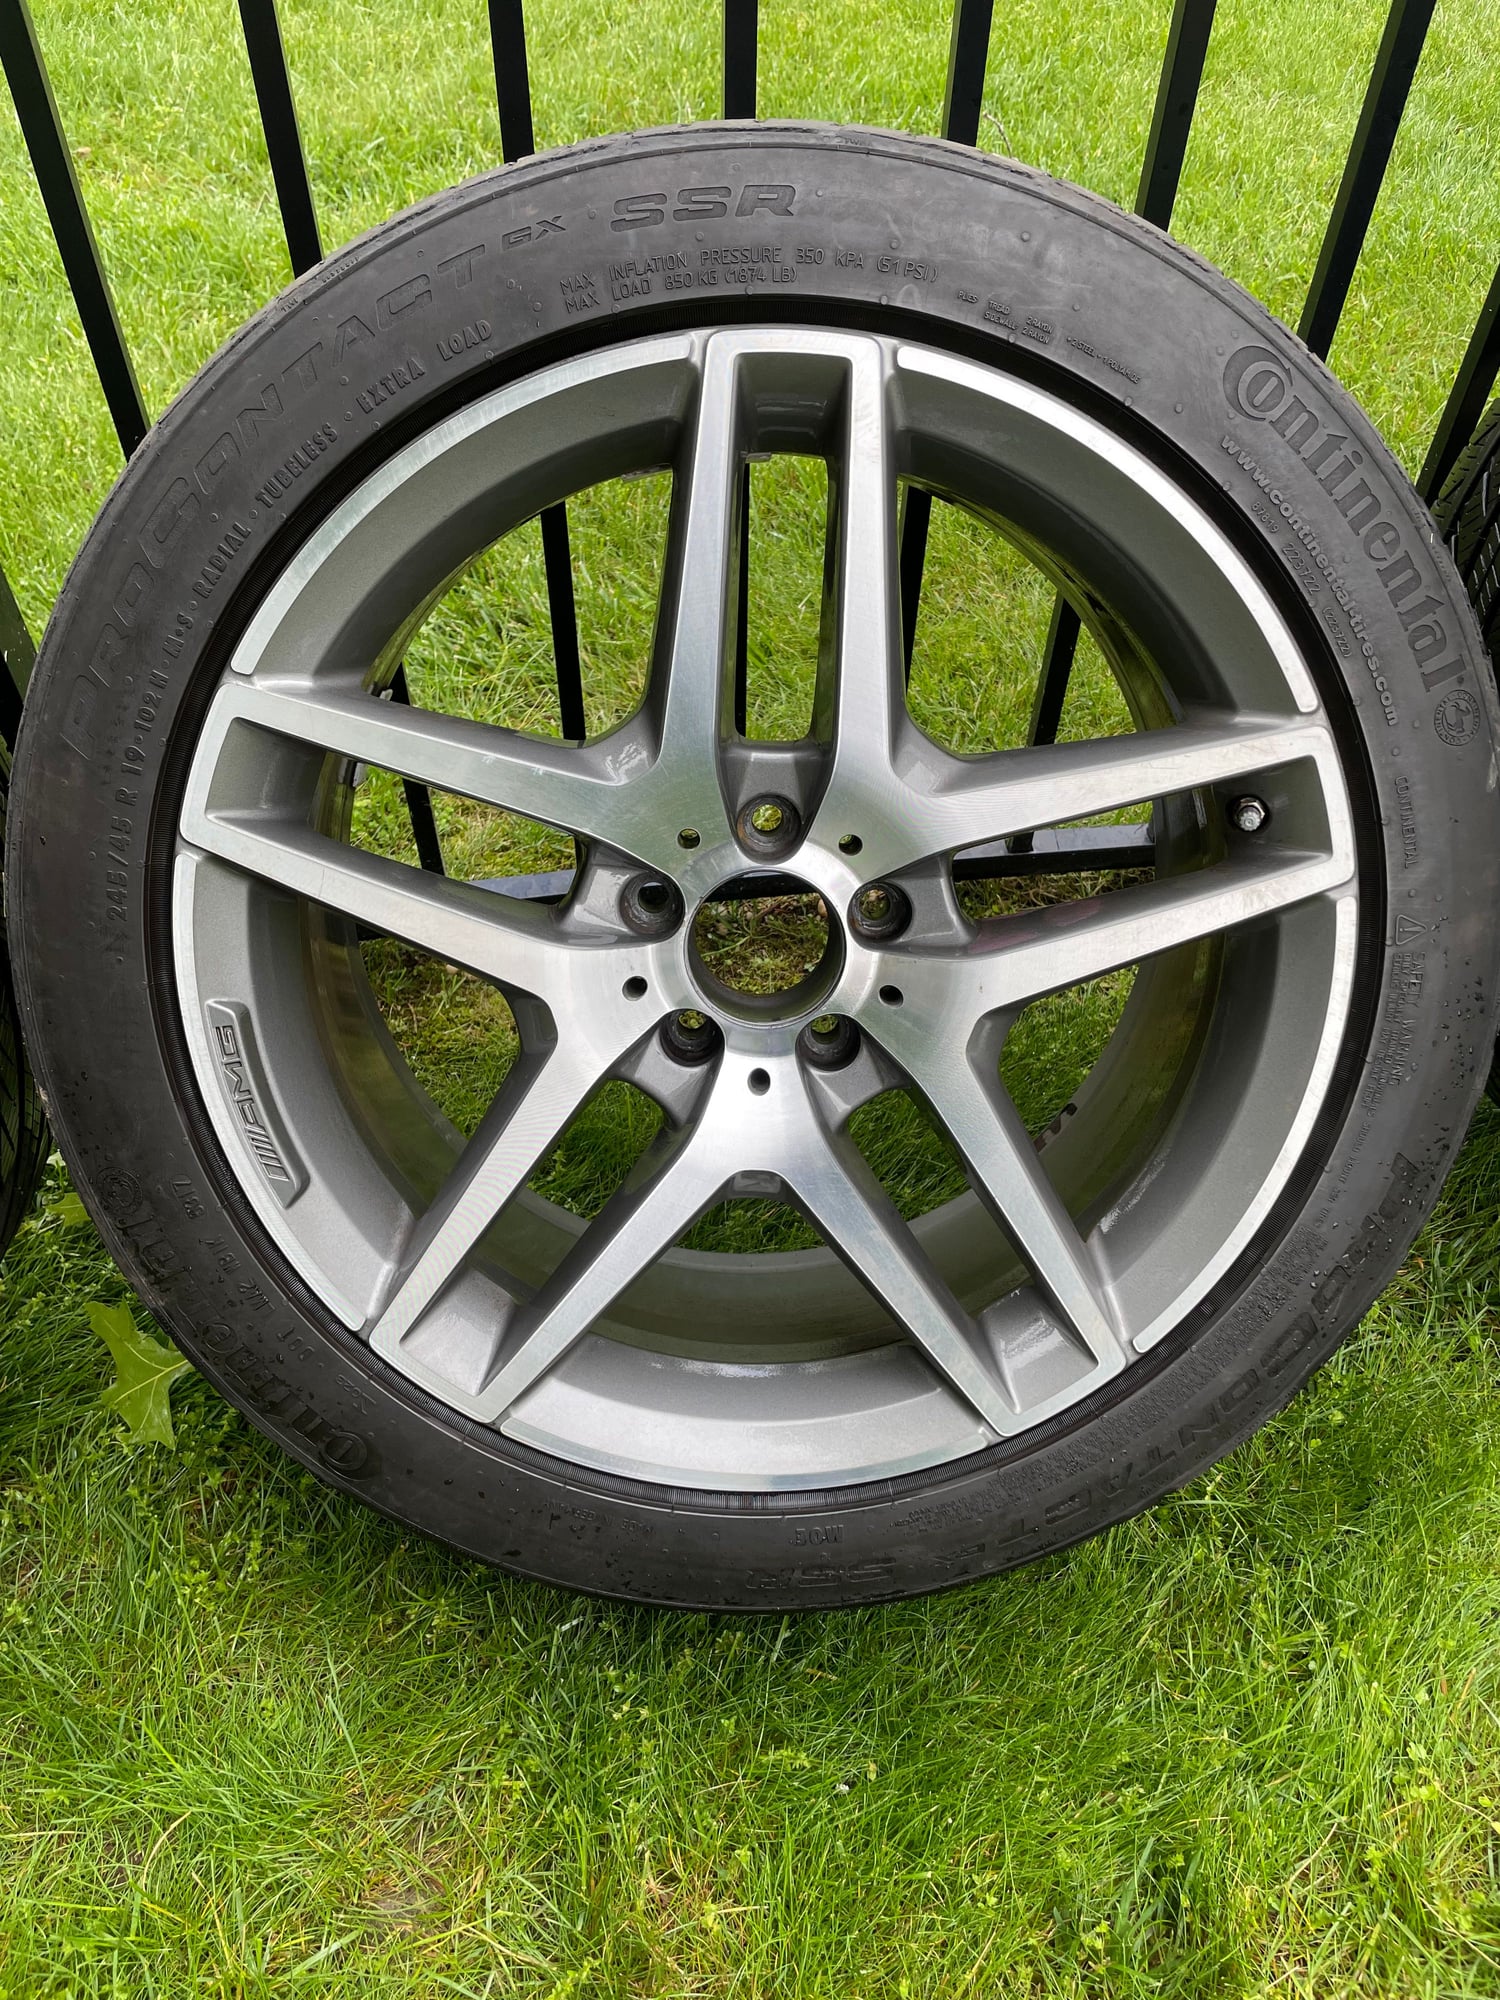 Wheels and Tires/Axles - 19" Mercedes S550 AMG Wheels and Tires - Used - 2015 to 2021 Mercedes-Benz S550 - Commack, NY 11725, United States